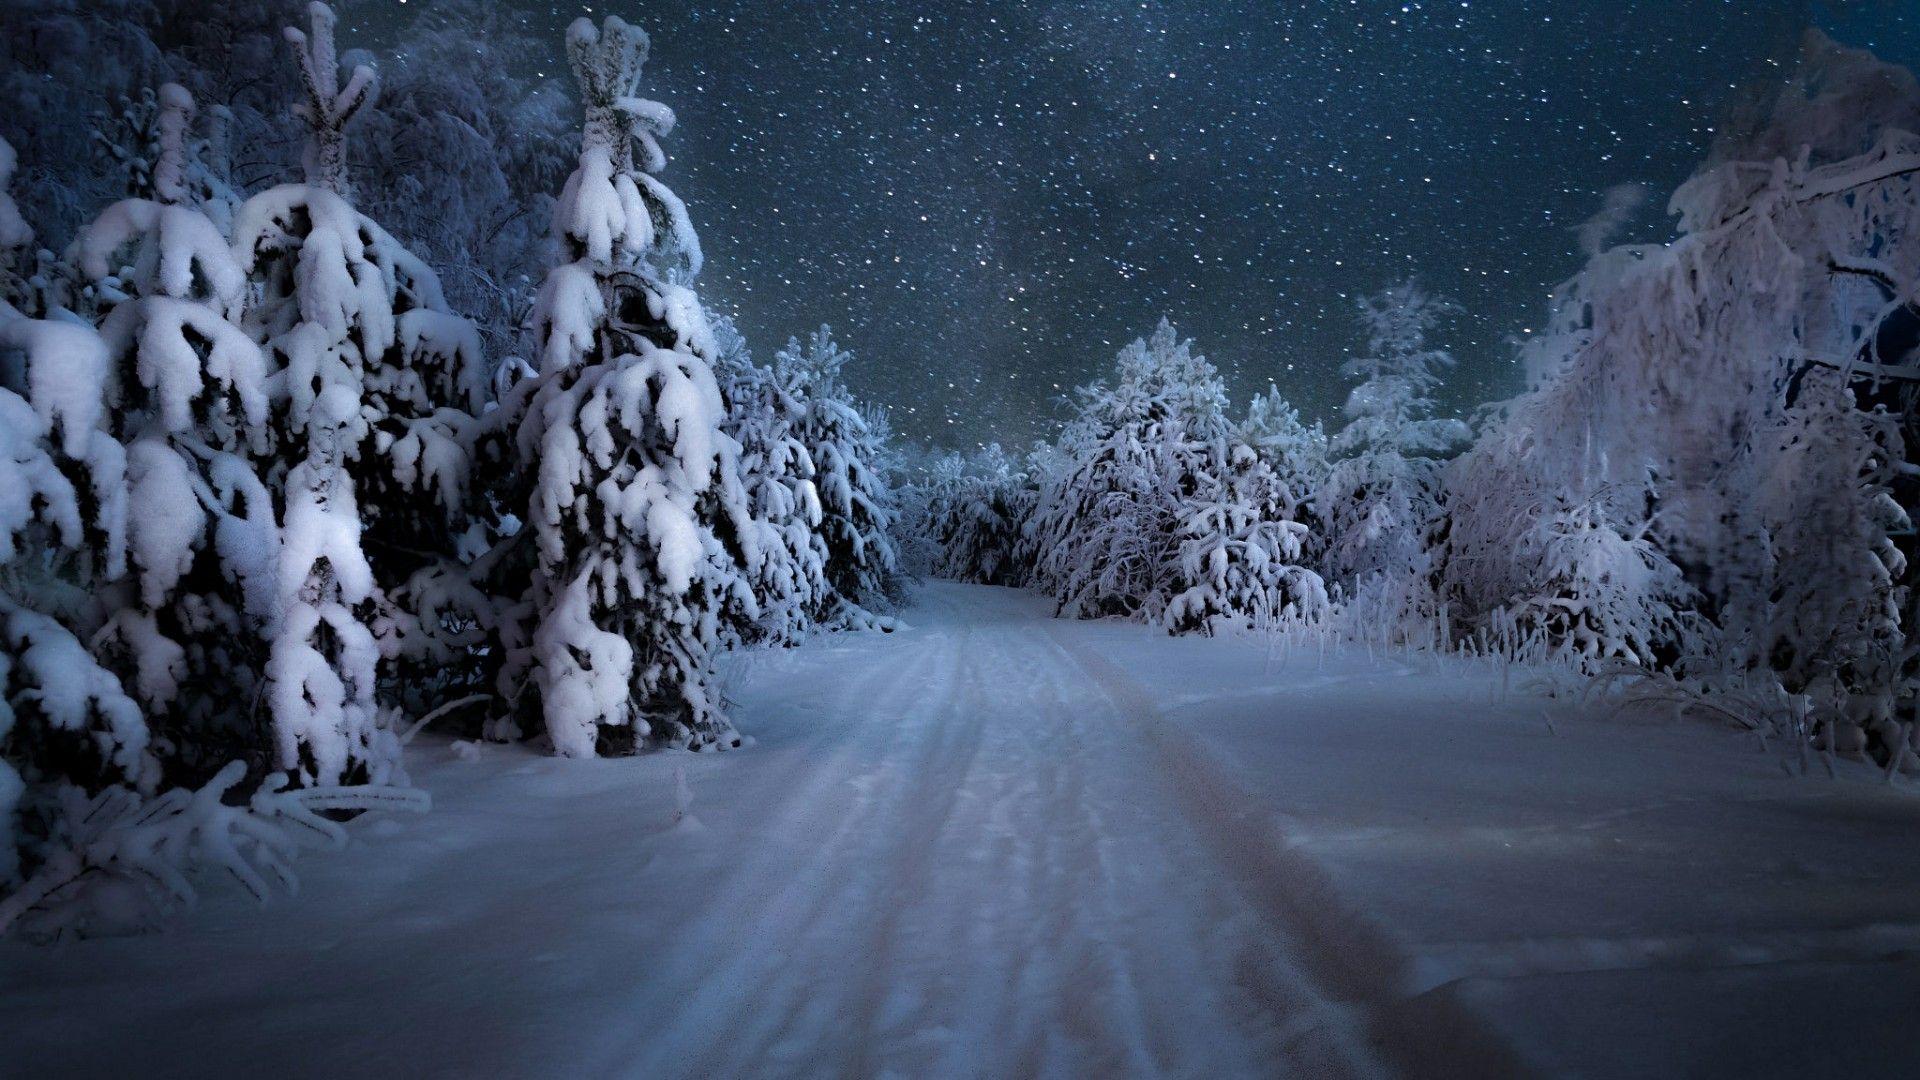 Starry Winter Night Over The Snowy Forest Wallpaper. Wallpaper